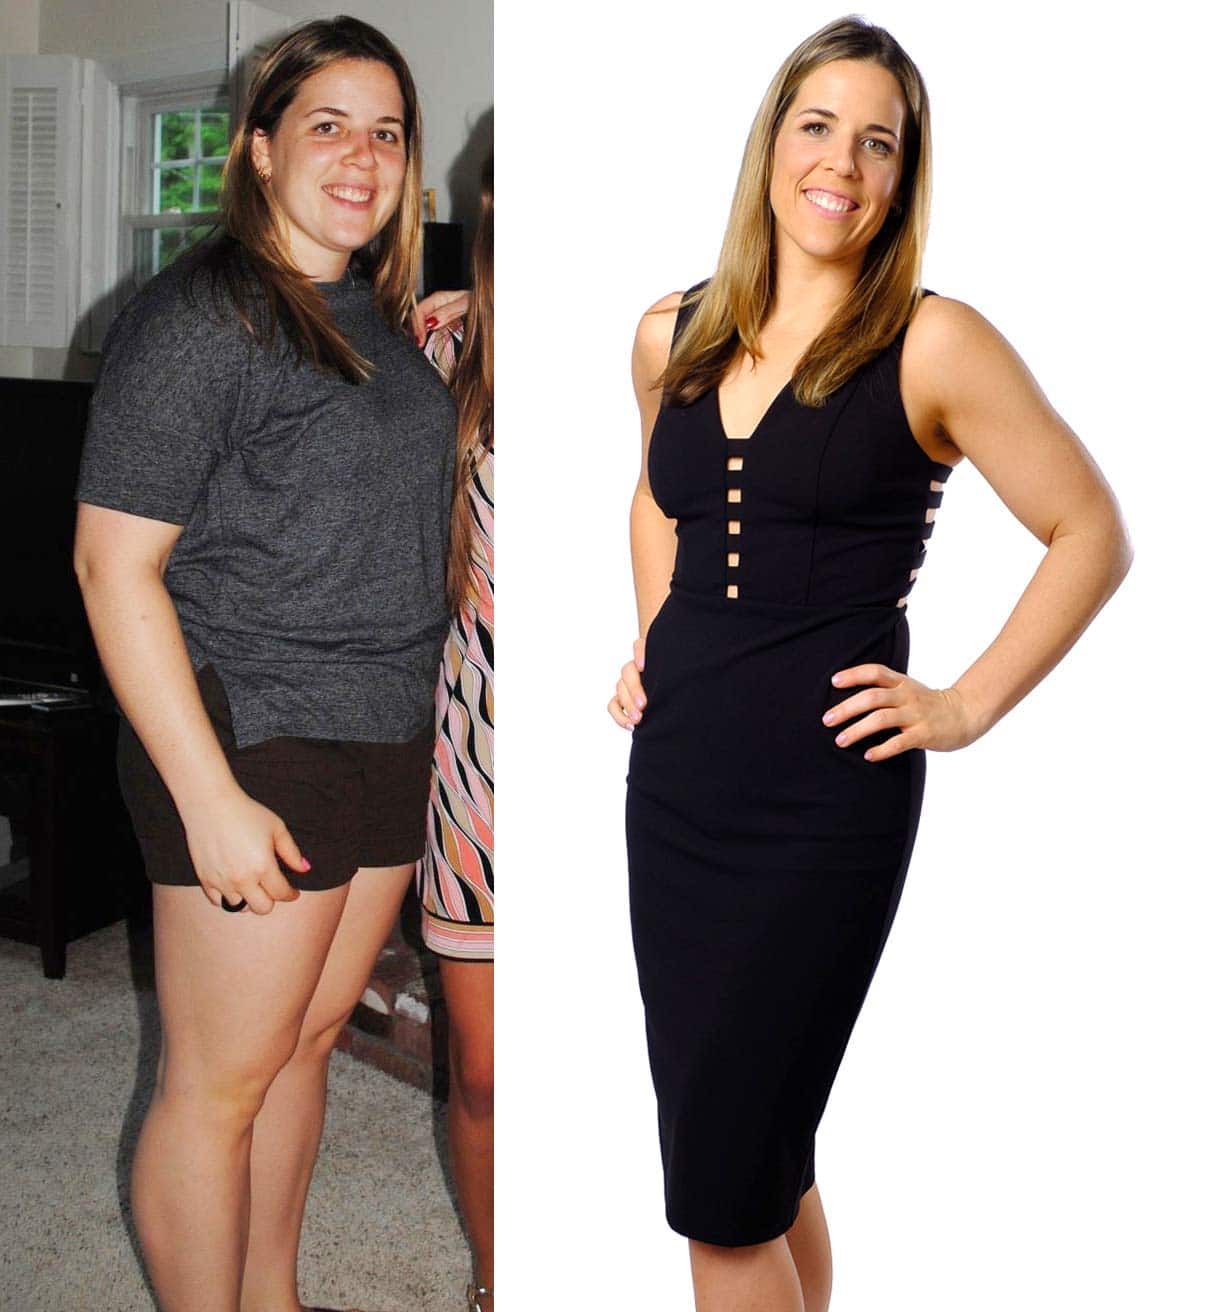 Michelle D'Amico made an incredible fit body 50 pound weight loss ...